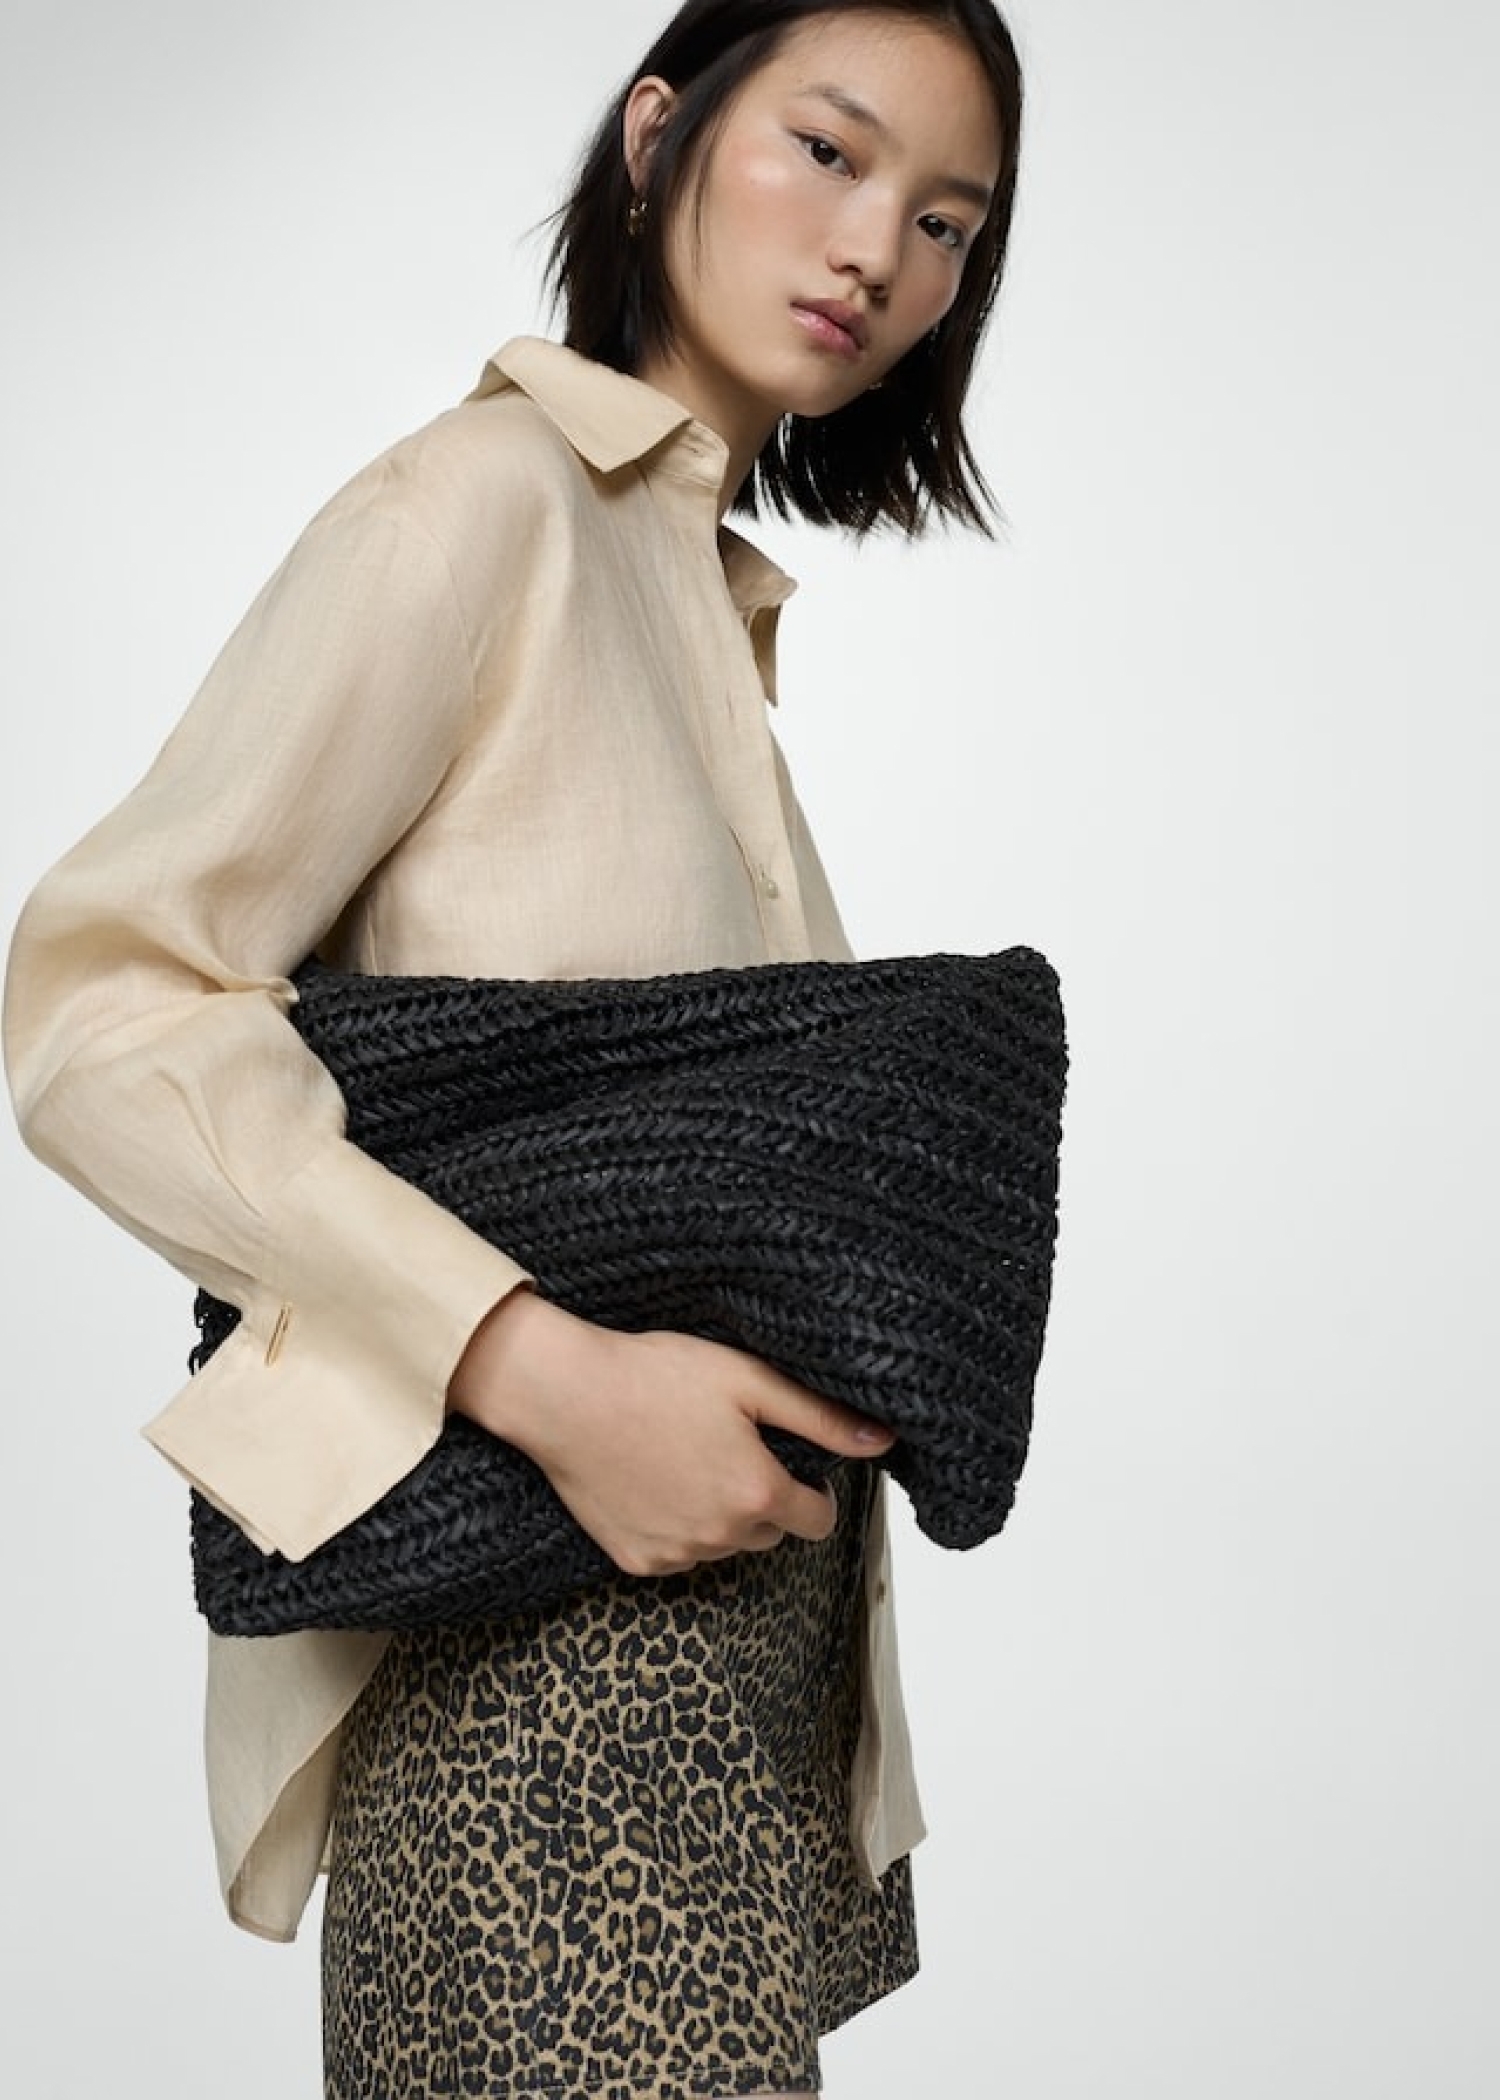 How to combine animal print with a black bag and a beige shirt.